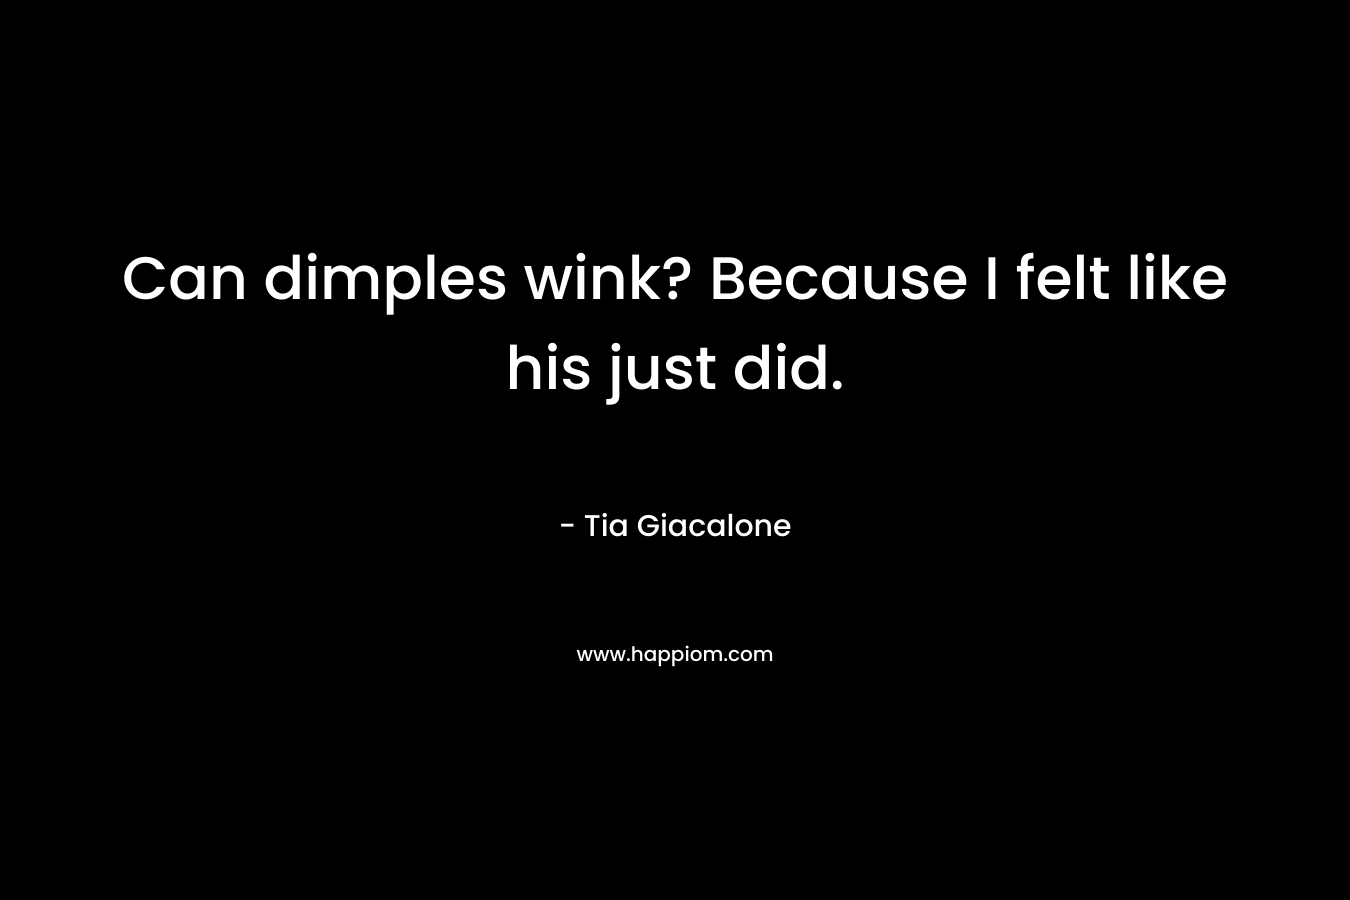 Can dimples wink? Because I felt like his just did. – Tia Giacalone